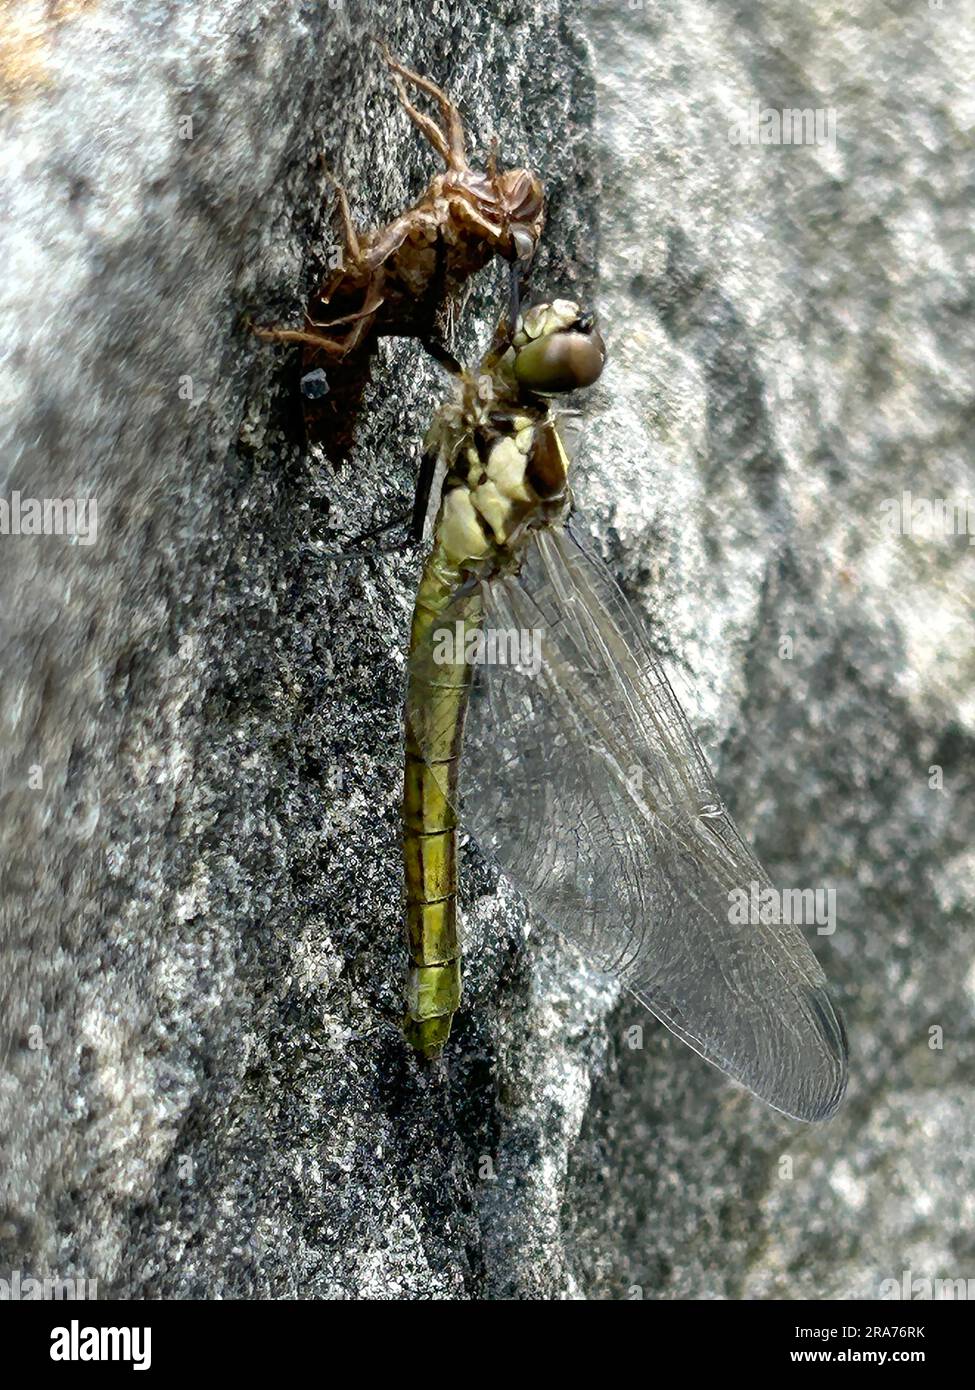 Here a dragon fly has pushed out of its larval skin - which can be seen in phot, and is resting and growing its shape/letting its body harden. The wet spot below dragonfly is liquid drops from emergent process- dragonfly is drying off after its birth. This photo was taken June 14, 2023, at the Coastal Maine Botanical Gardens in Boothbay, Maine. Stock Photo